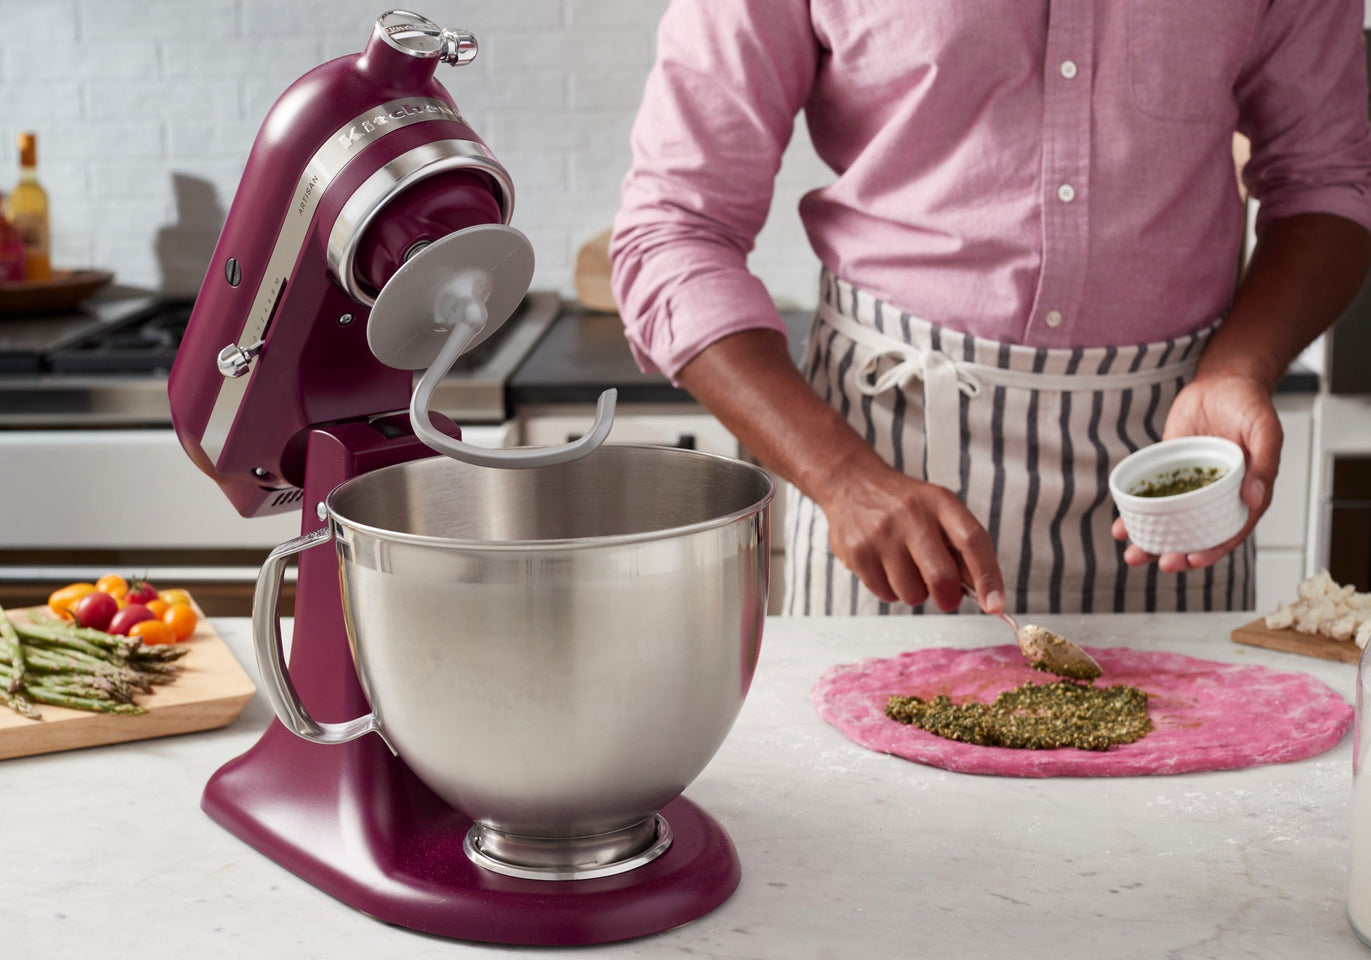 4.8L Artisan Stand Mixer 2022 Colour of the Year - Beetroot KSM195